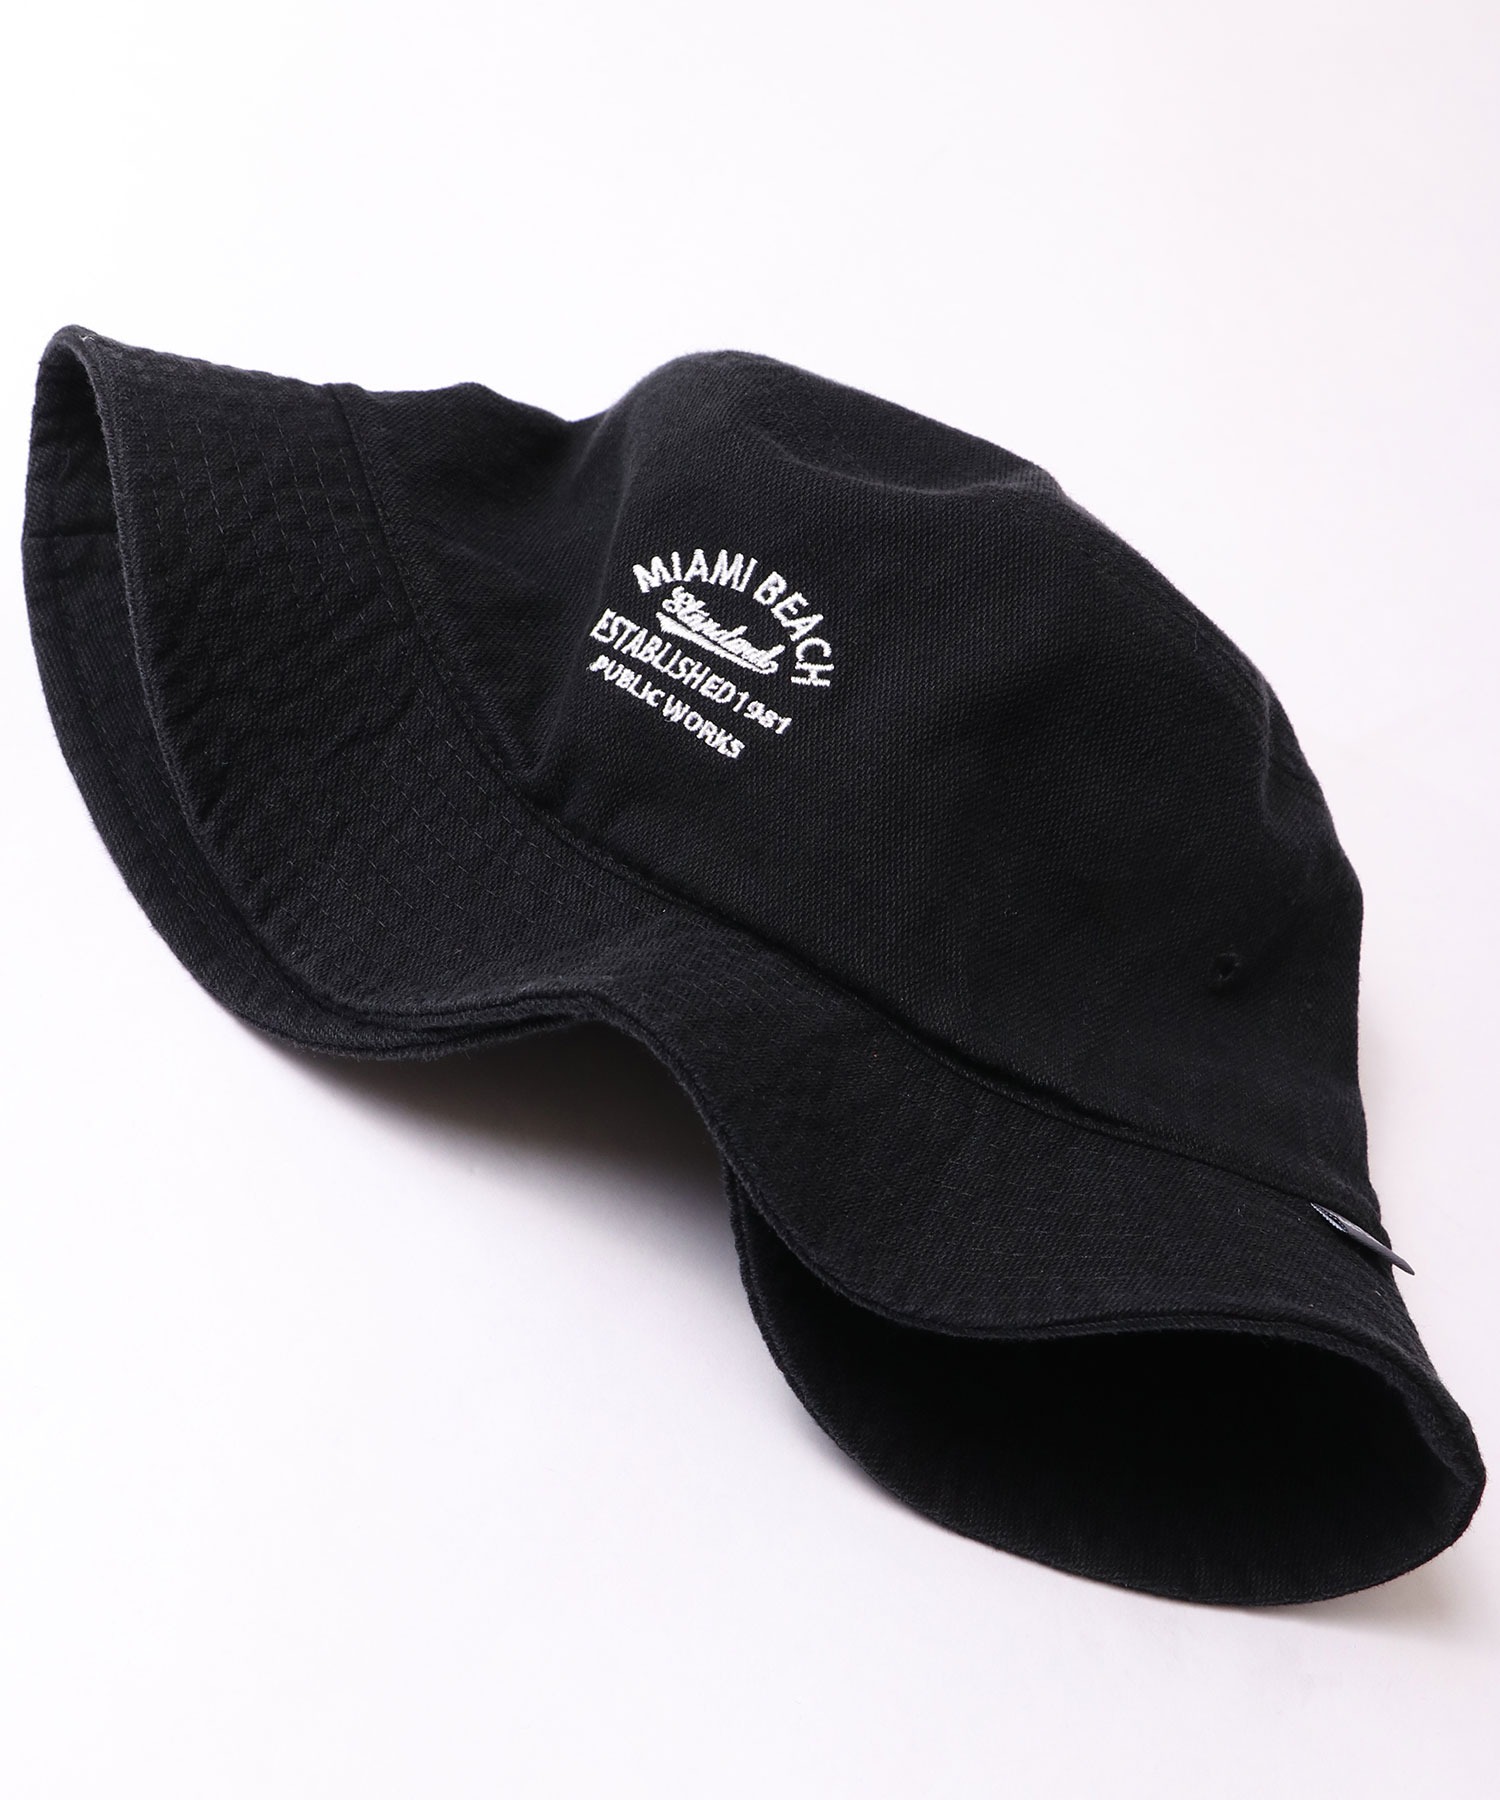 Well-Tailored WASHED CANVAS BUCKET 着後レビューで 送料無料 ウォッシュキャンバス バケットハット HAT 最大93％オフ